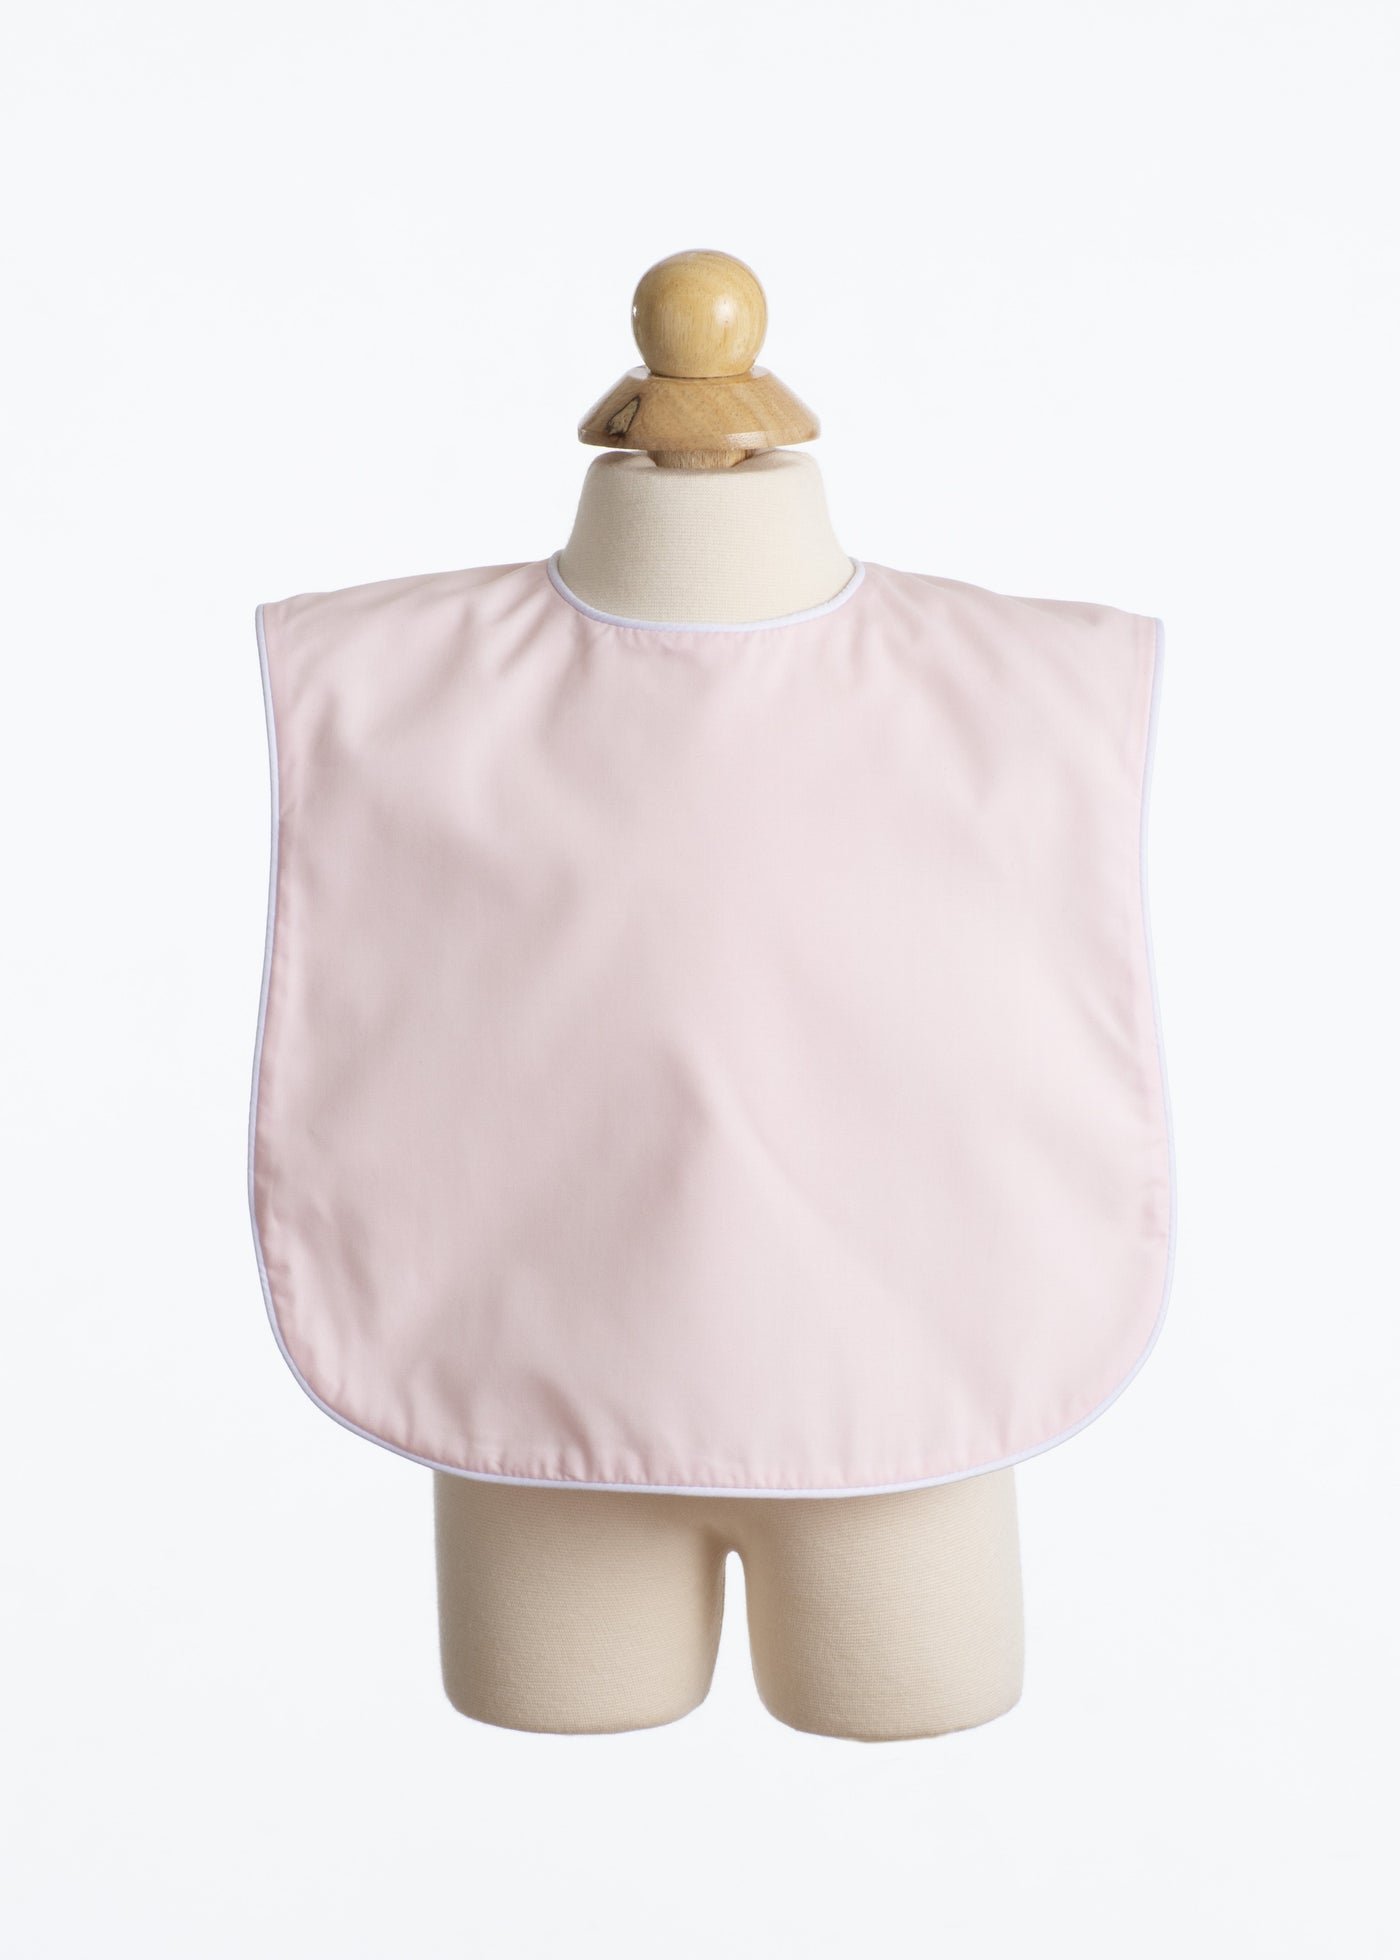 Oversized Pink Bib with White Piping